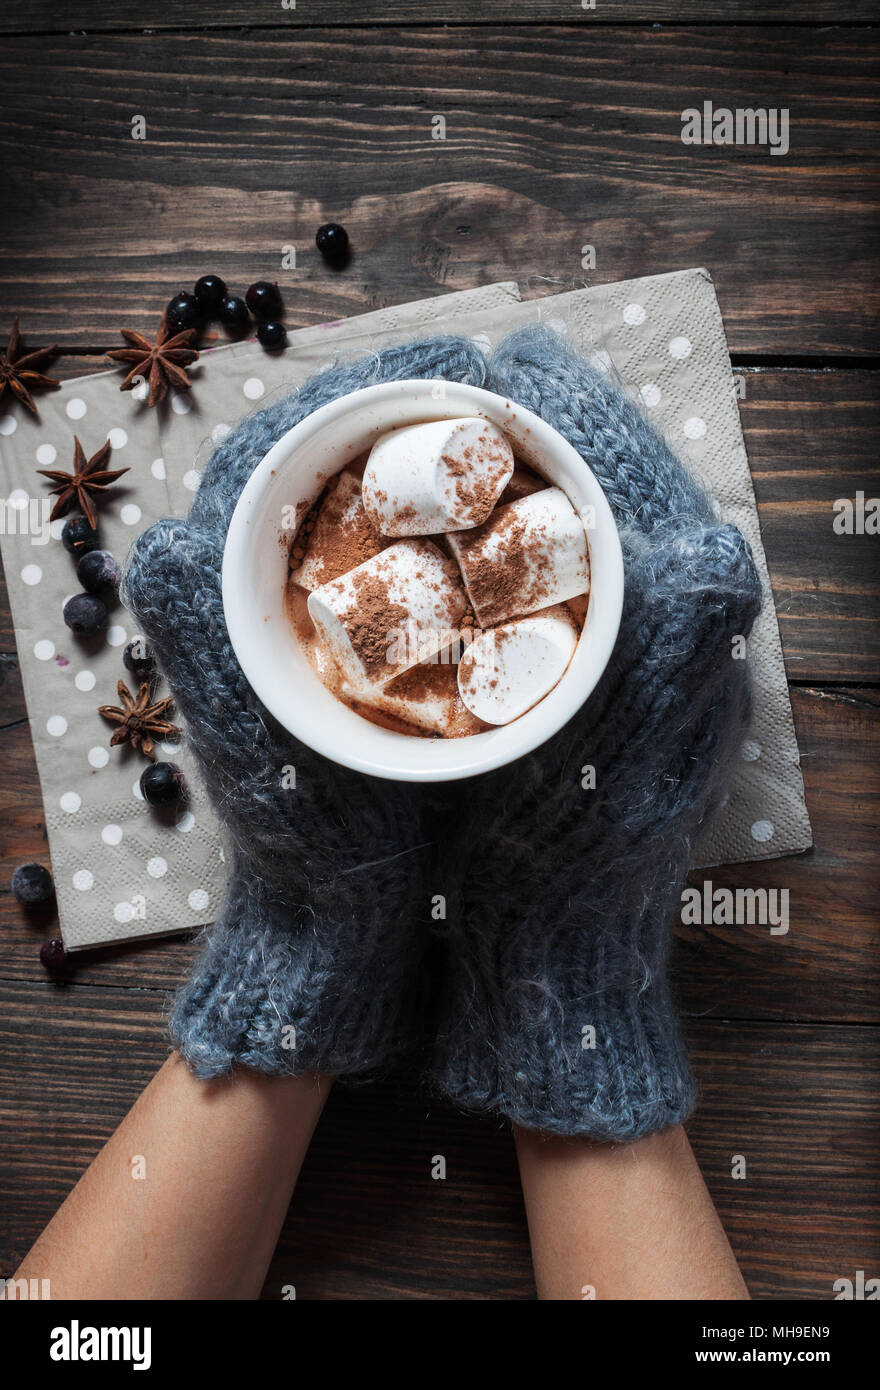 Hands in knitted mittens holding hot chocolate in grey heart cup with marshmallow and cinnamon, closeup Stock Photo